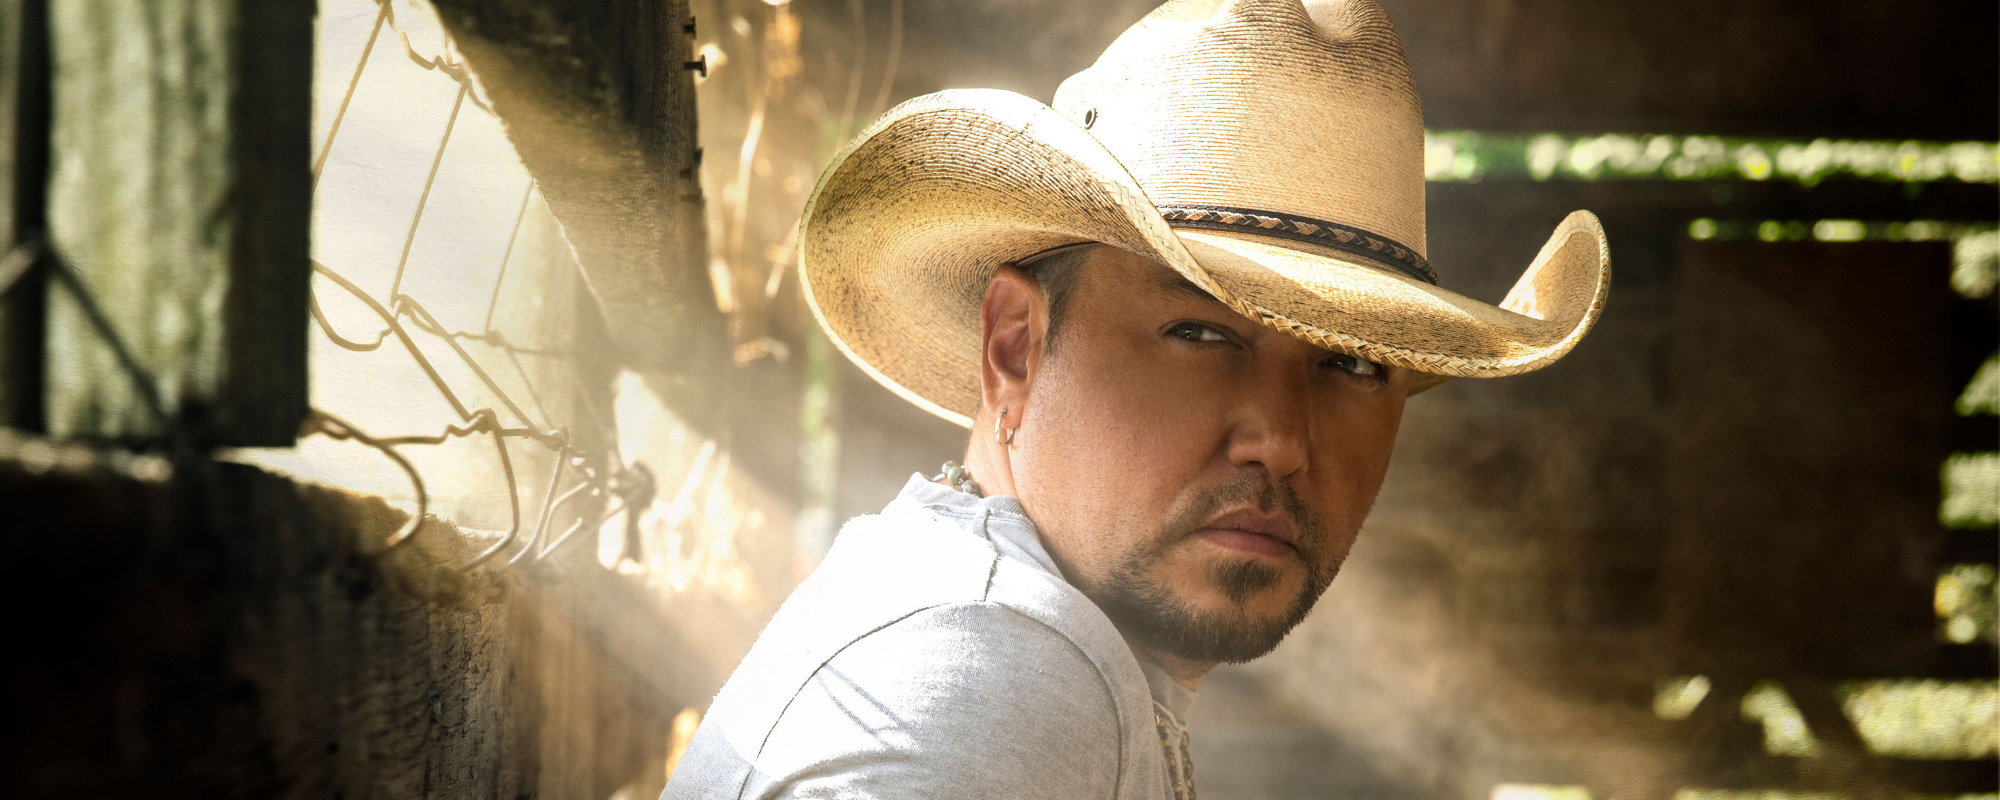 Jason Aldean Lands 25th No.1 With “Blame It On You” Ahead of Back In The Saddle Tour